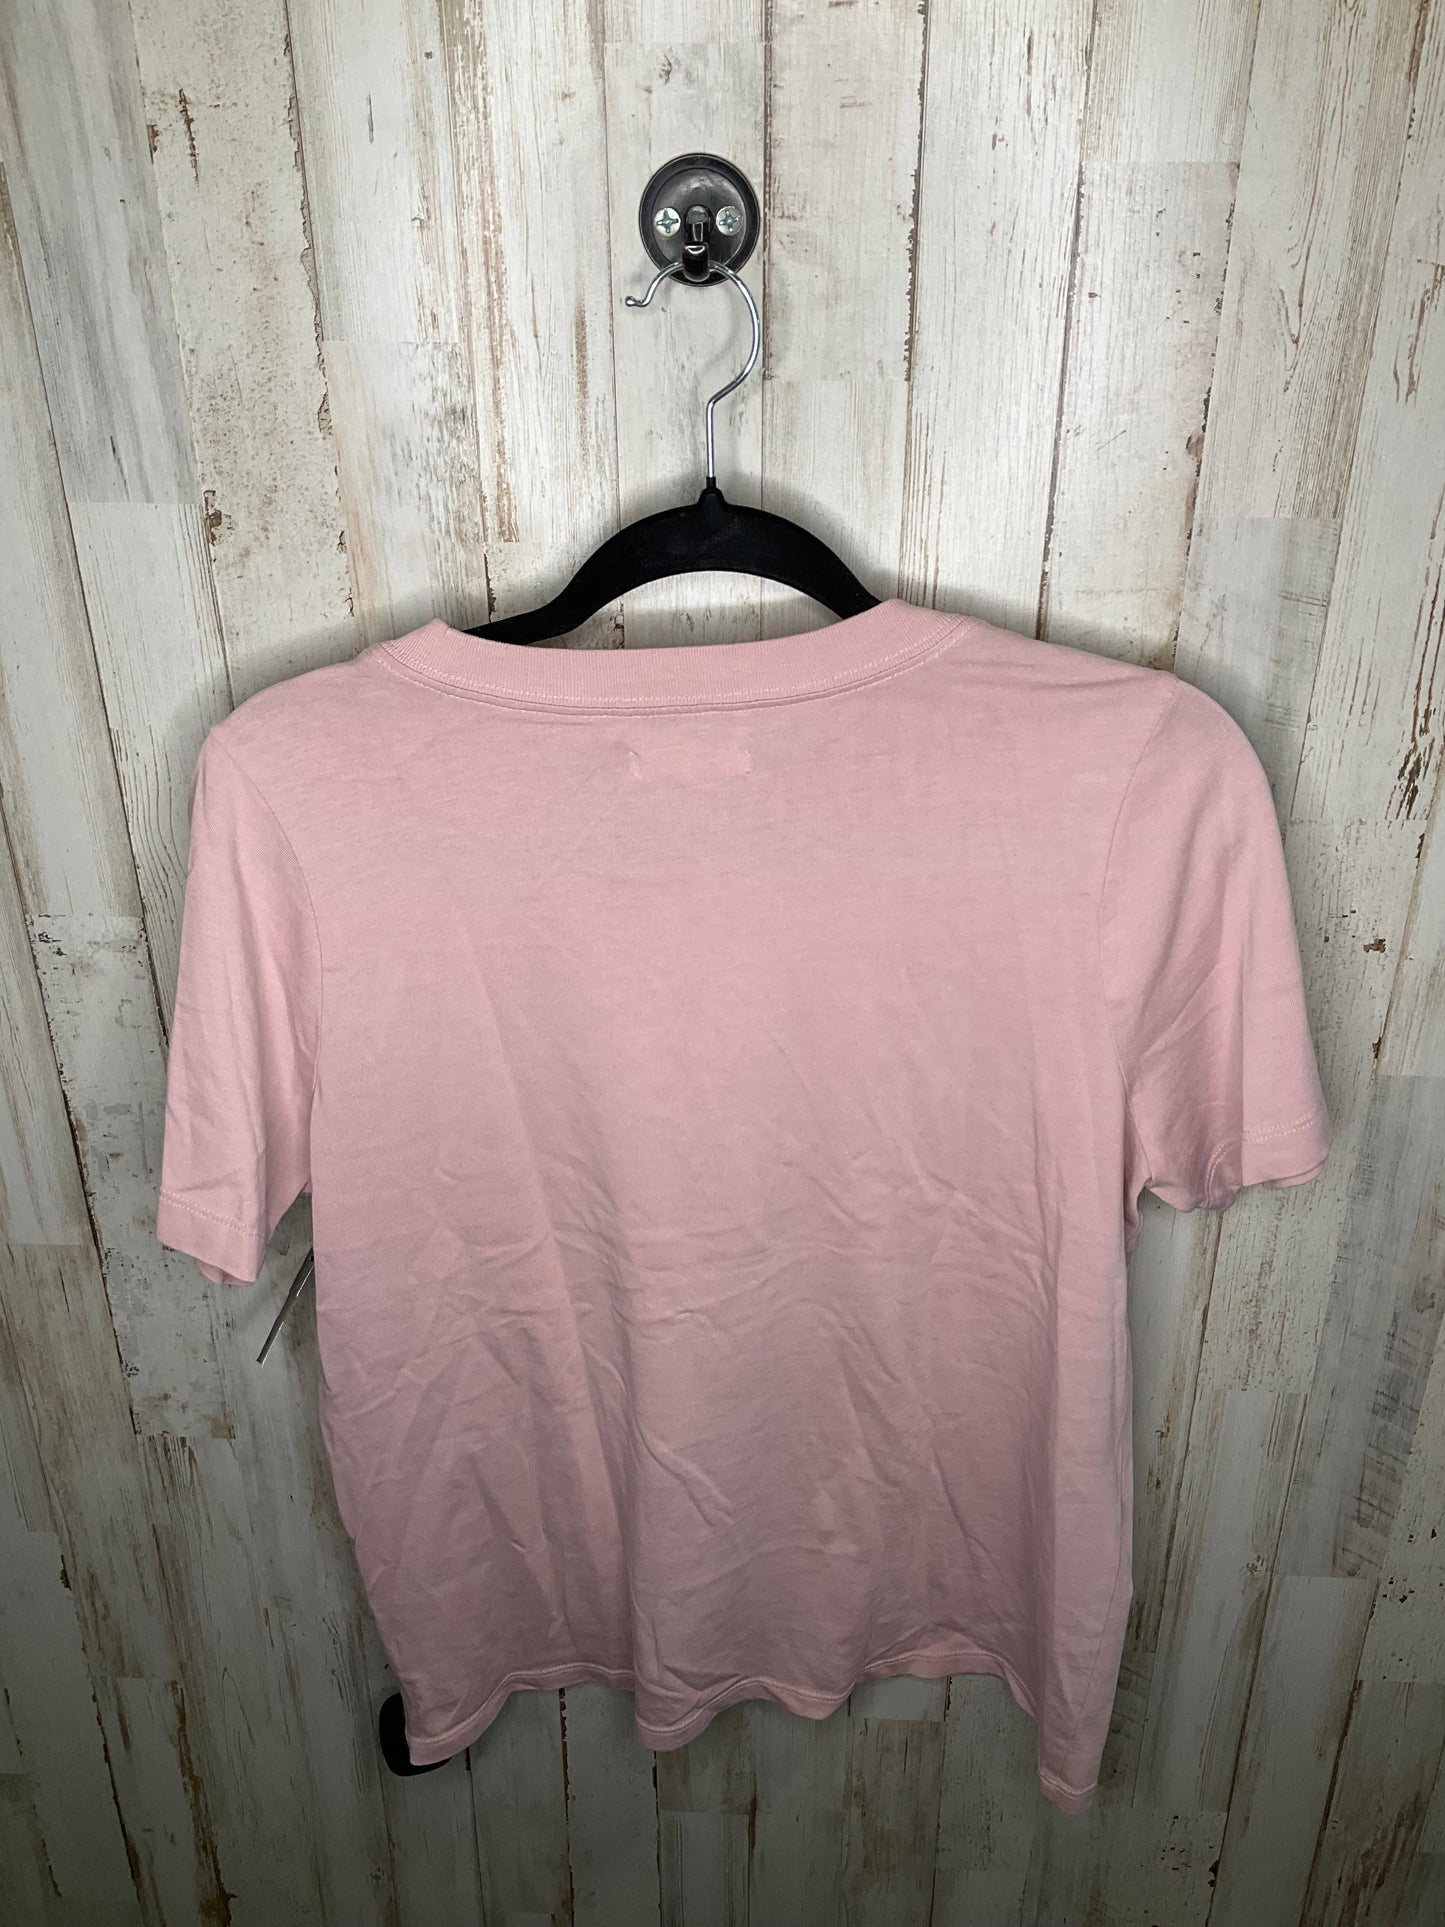 Pink Top Short Sleeve Madewell, Size L